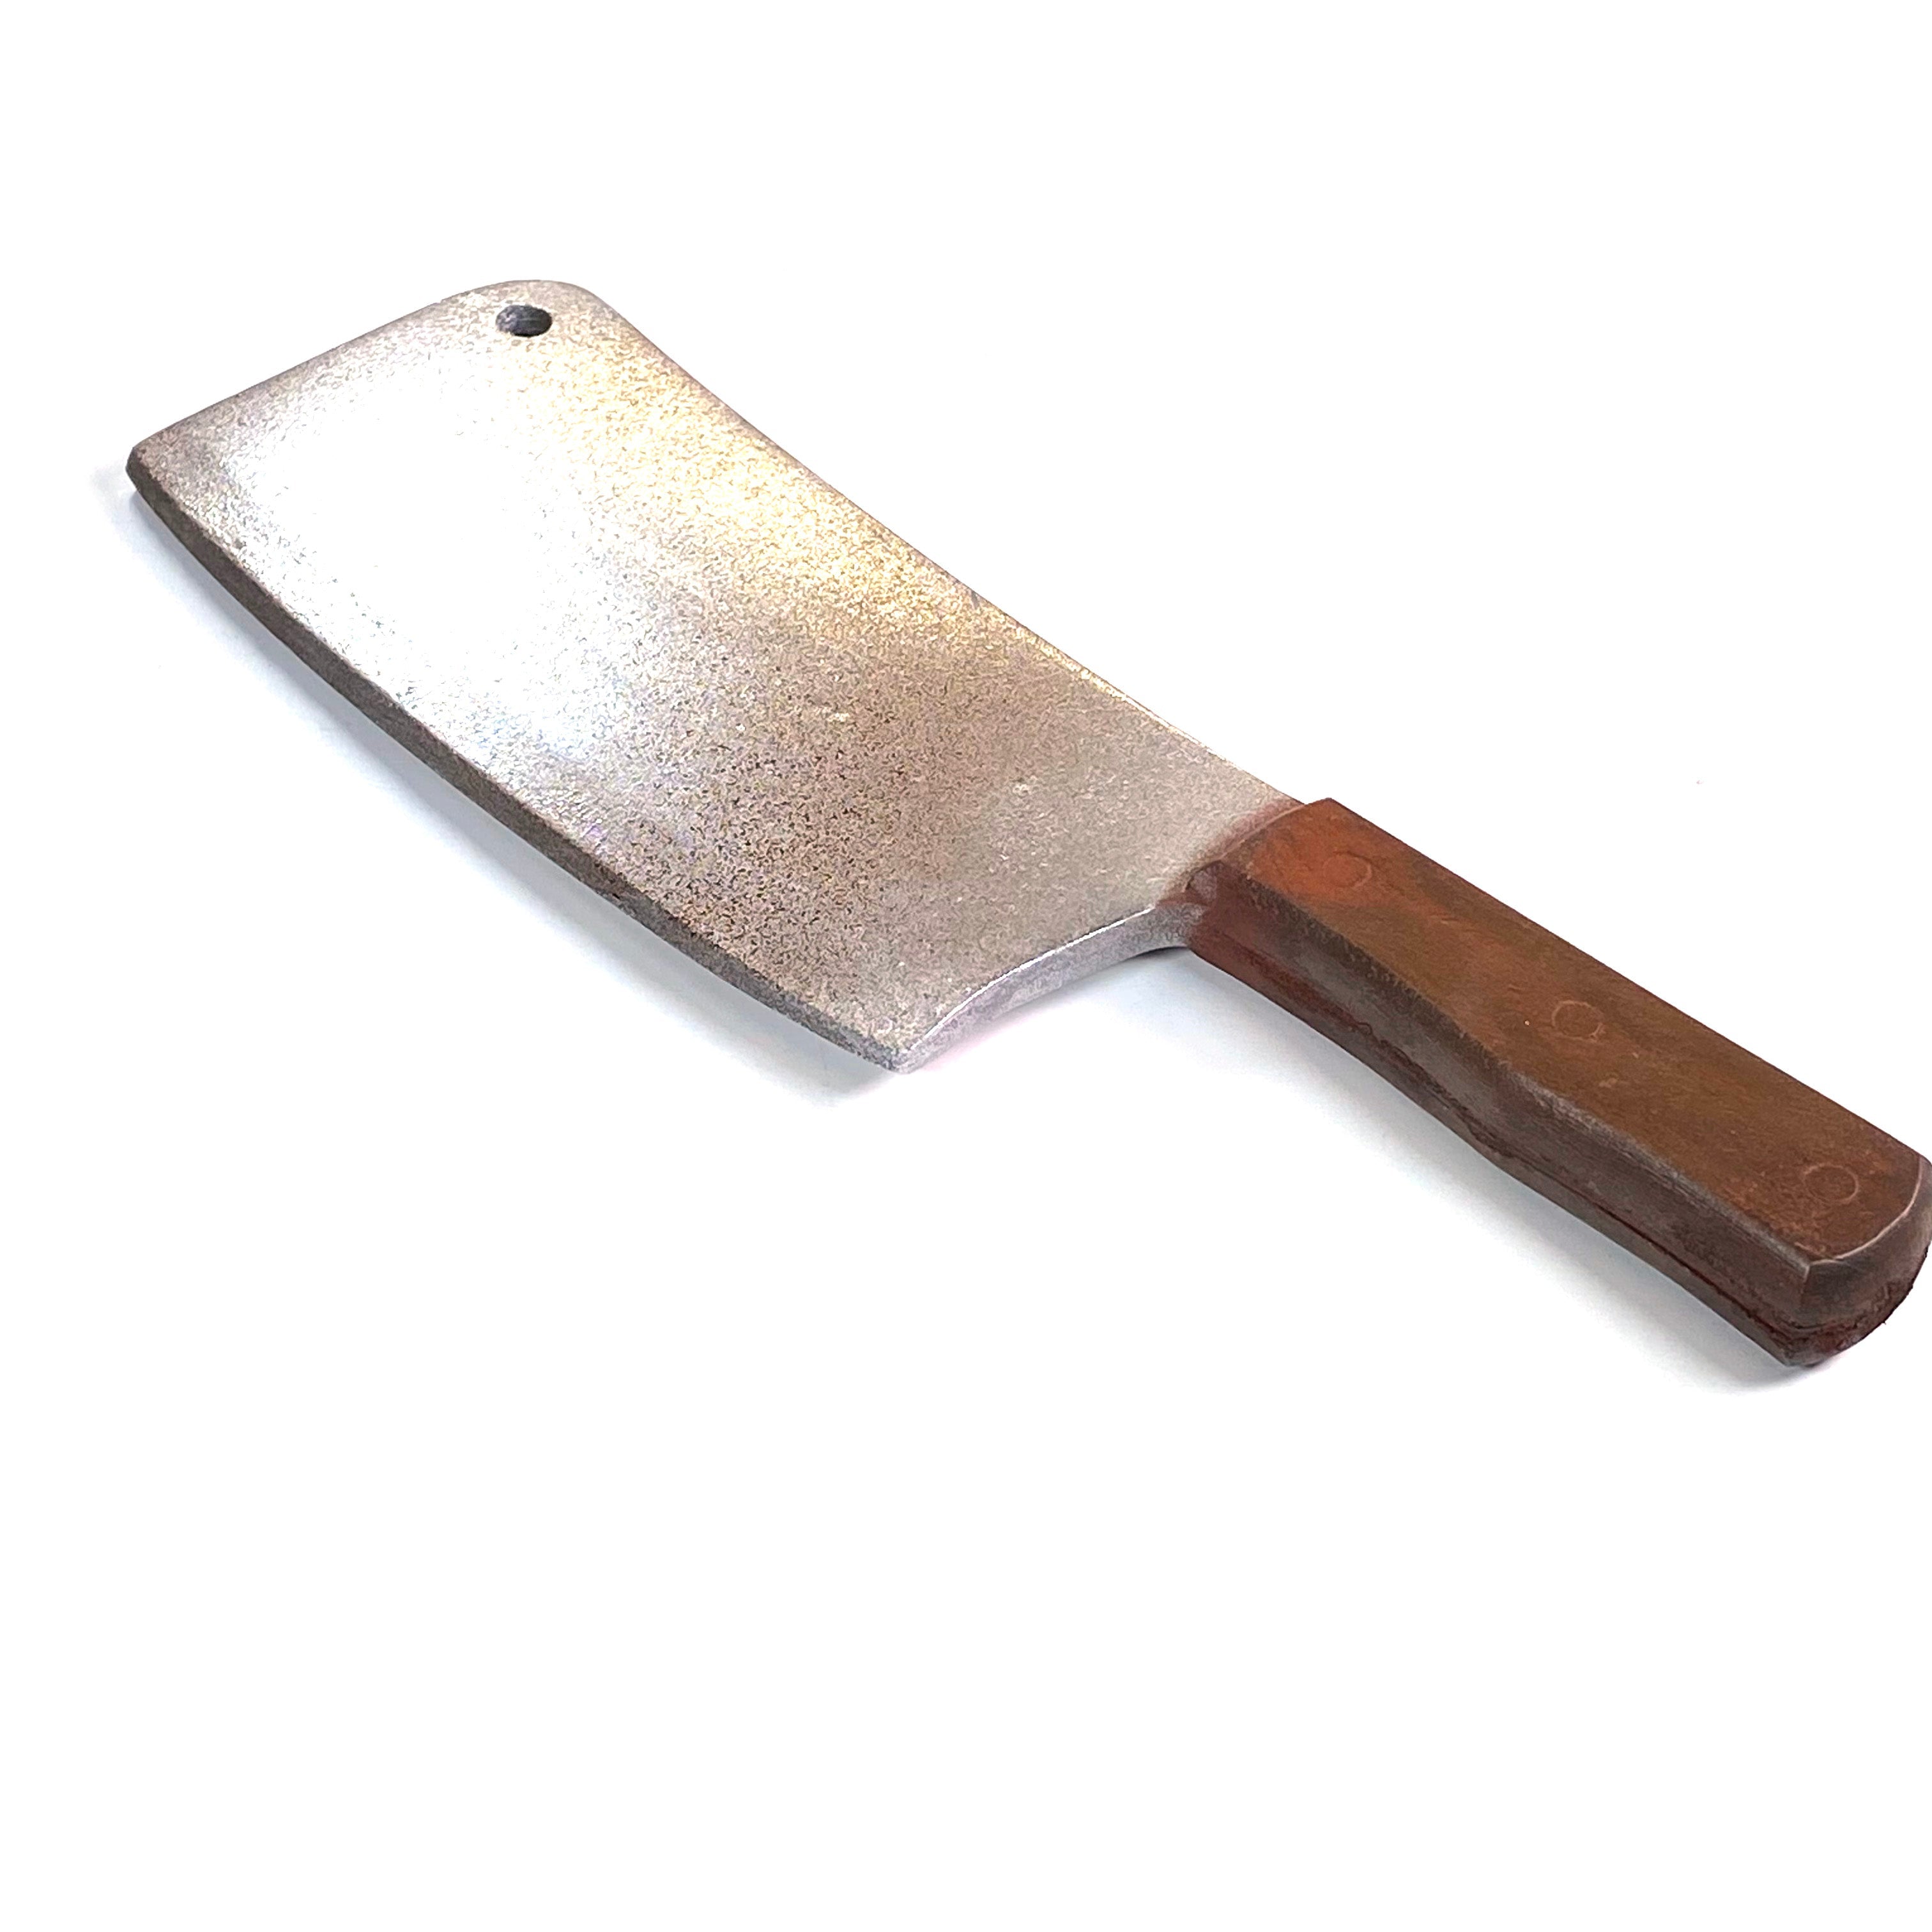 Foam Kitchen Cleaver Blade Knife Prop - Rusty - Rusty Blade with Brown Handle